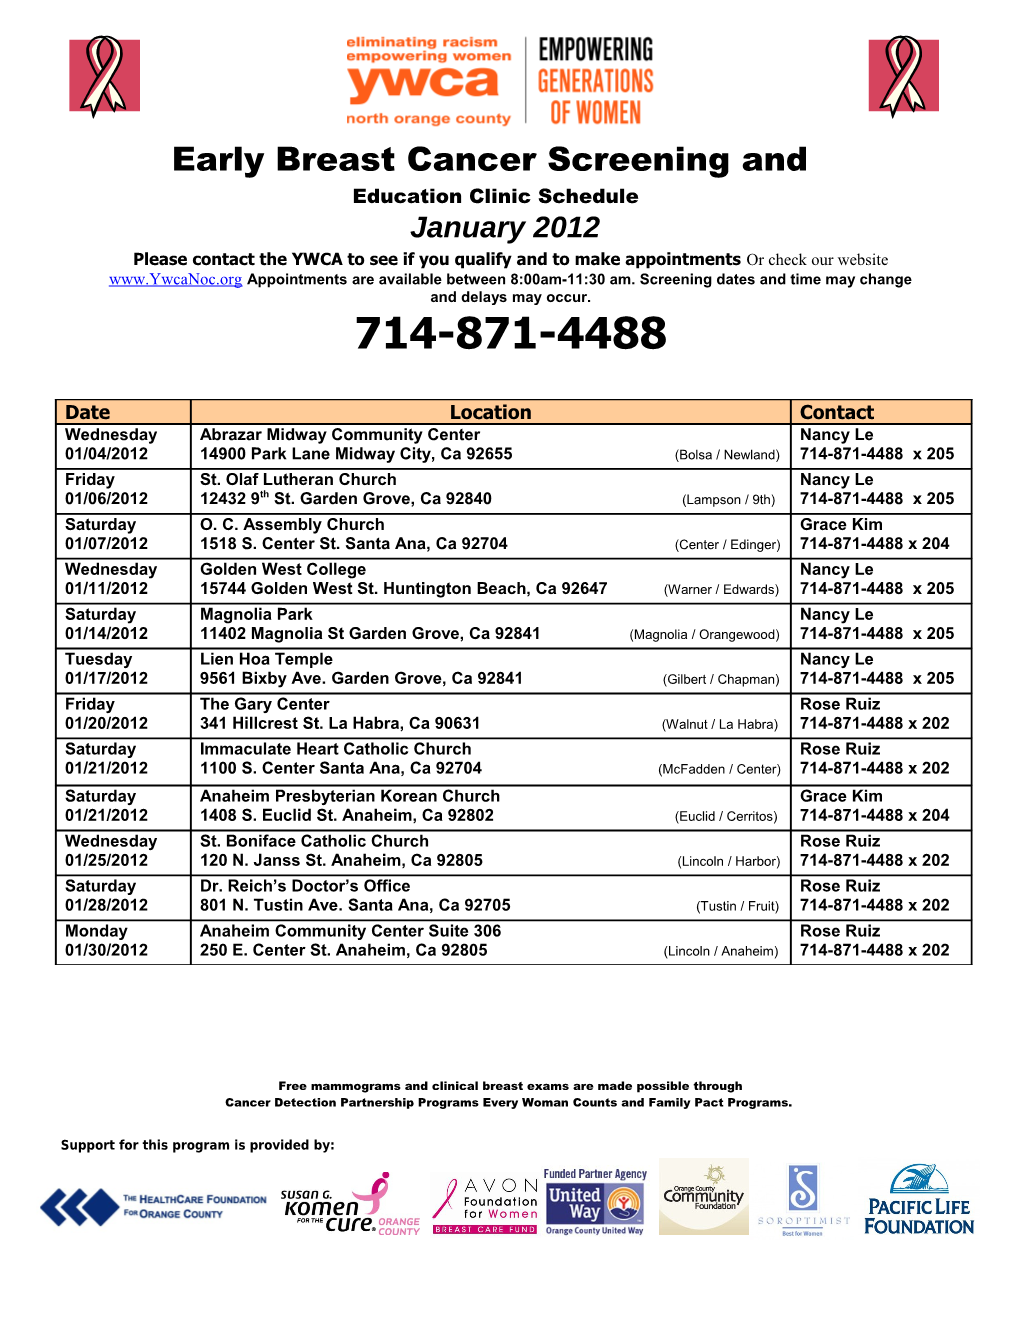 Early Breast Cancer Screening And